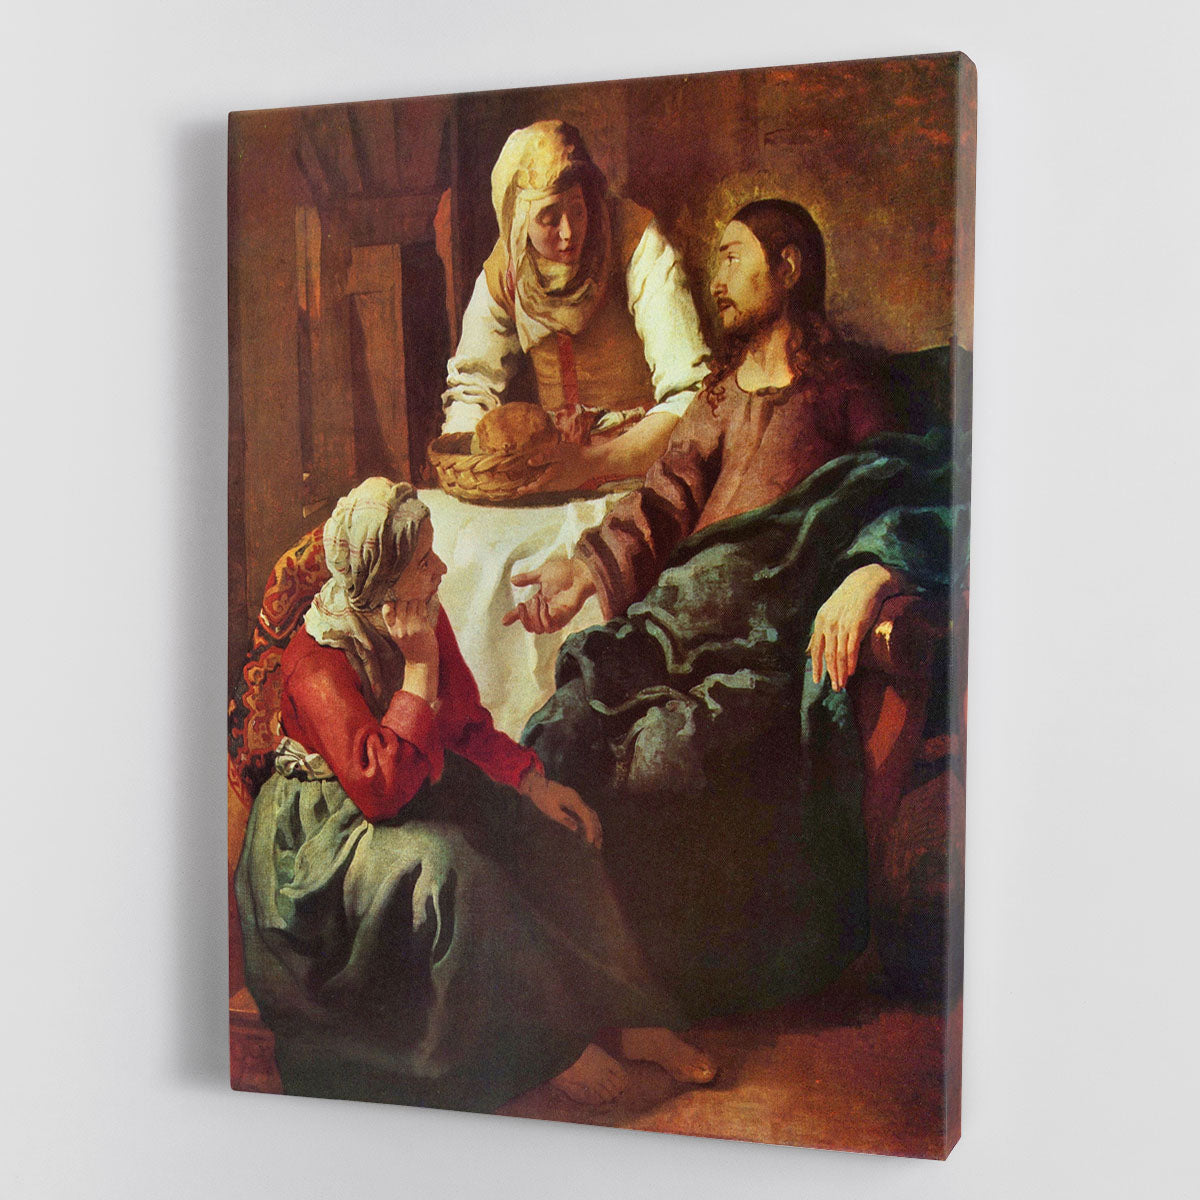 Christ with Mary and Martha by Vermeer Canvas Print or Poster - Canvas Art Rocks - 1